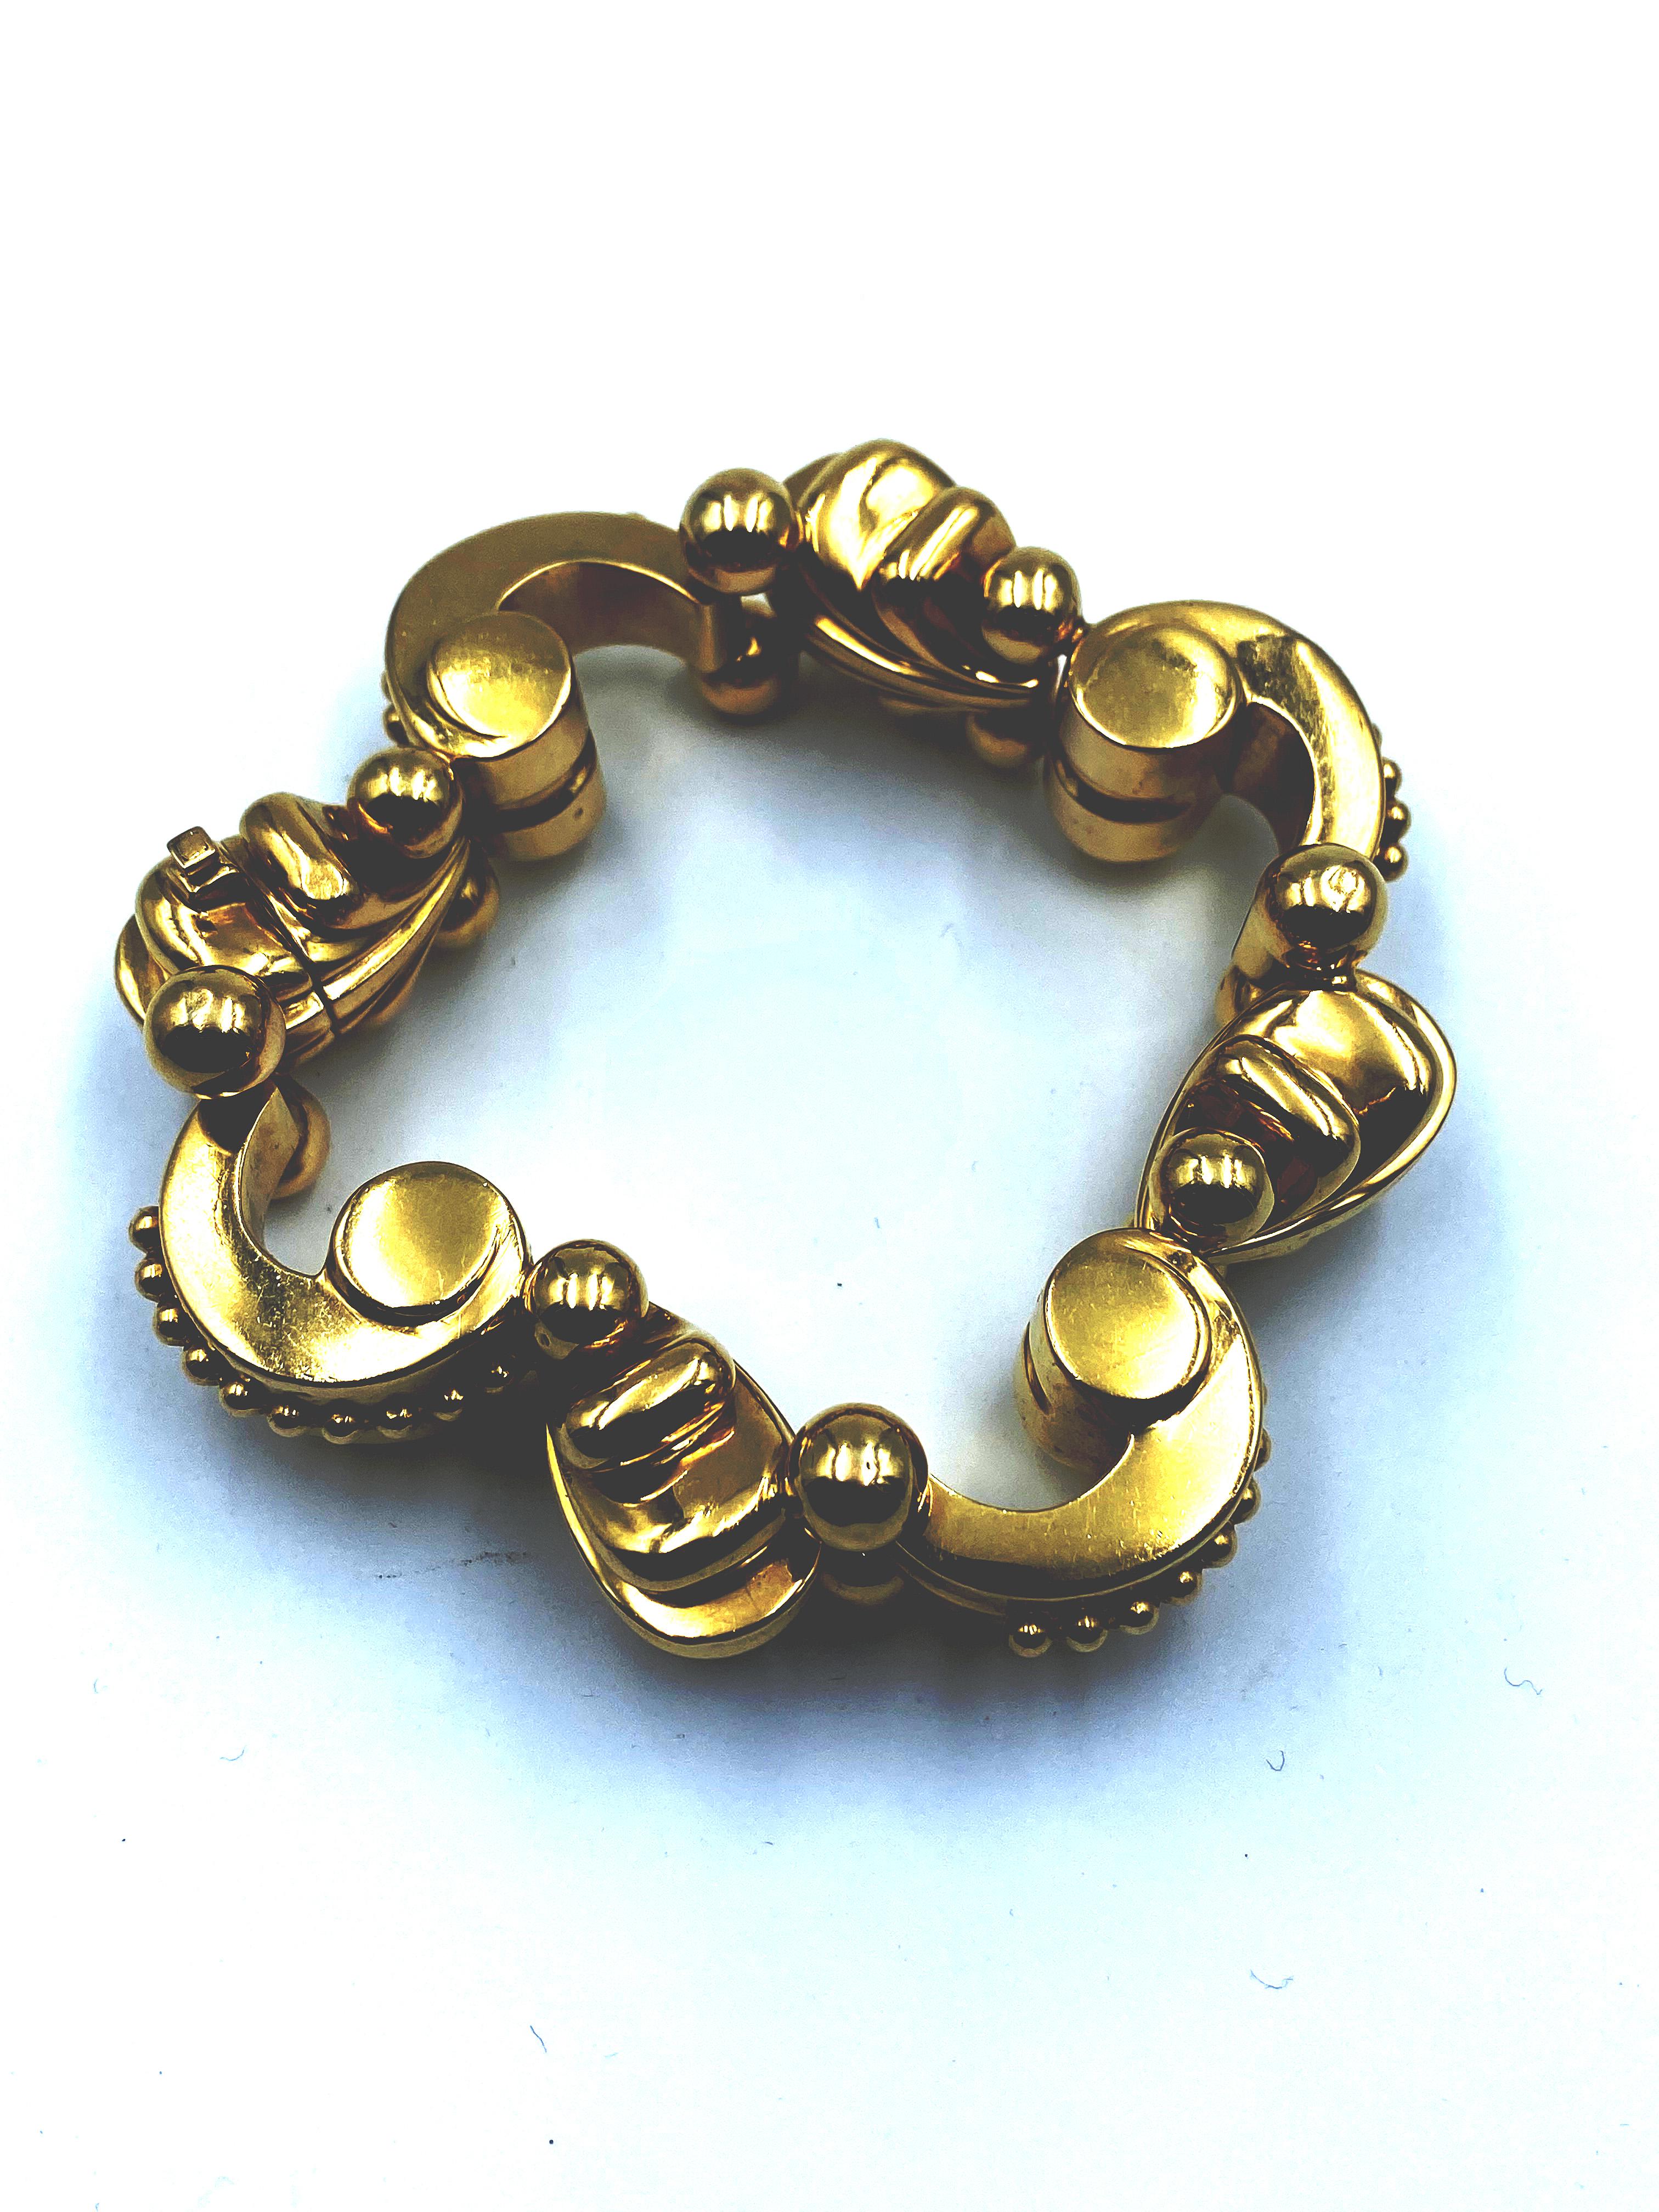 Gorgeous italian art decò gold bracelet, about 1940
Produced by ANNARATONE & MOGYARY, ITALY 1940'S
It comes with fascist mark on the back side, near the clasp.
Lenght cm 22
Weight 116,12
Perfect conditions